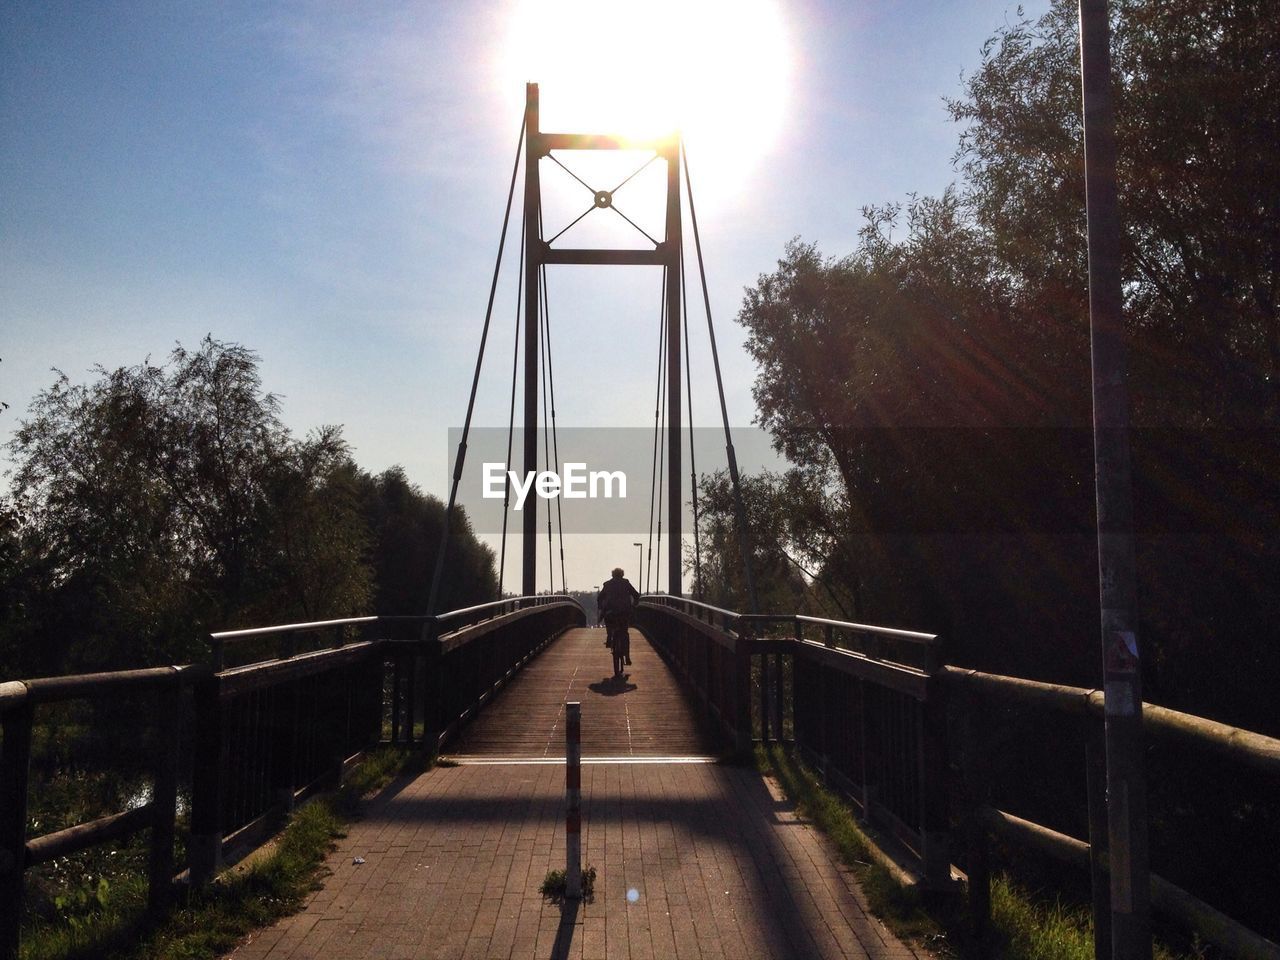 Silhouette person riding bicycle on bridge during sunny day